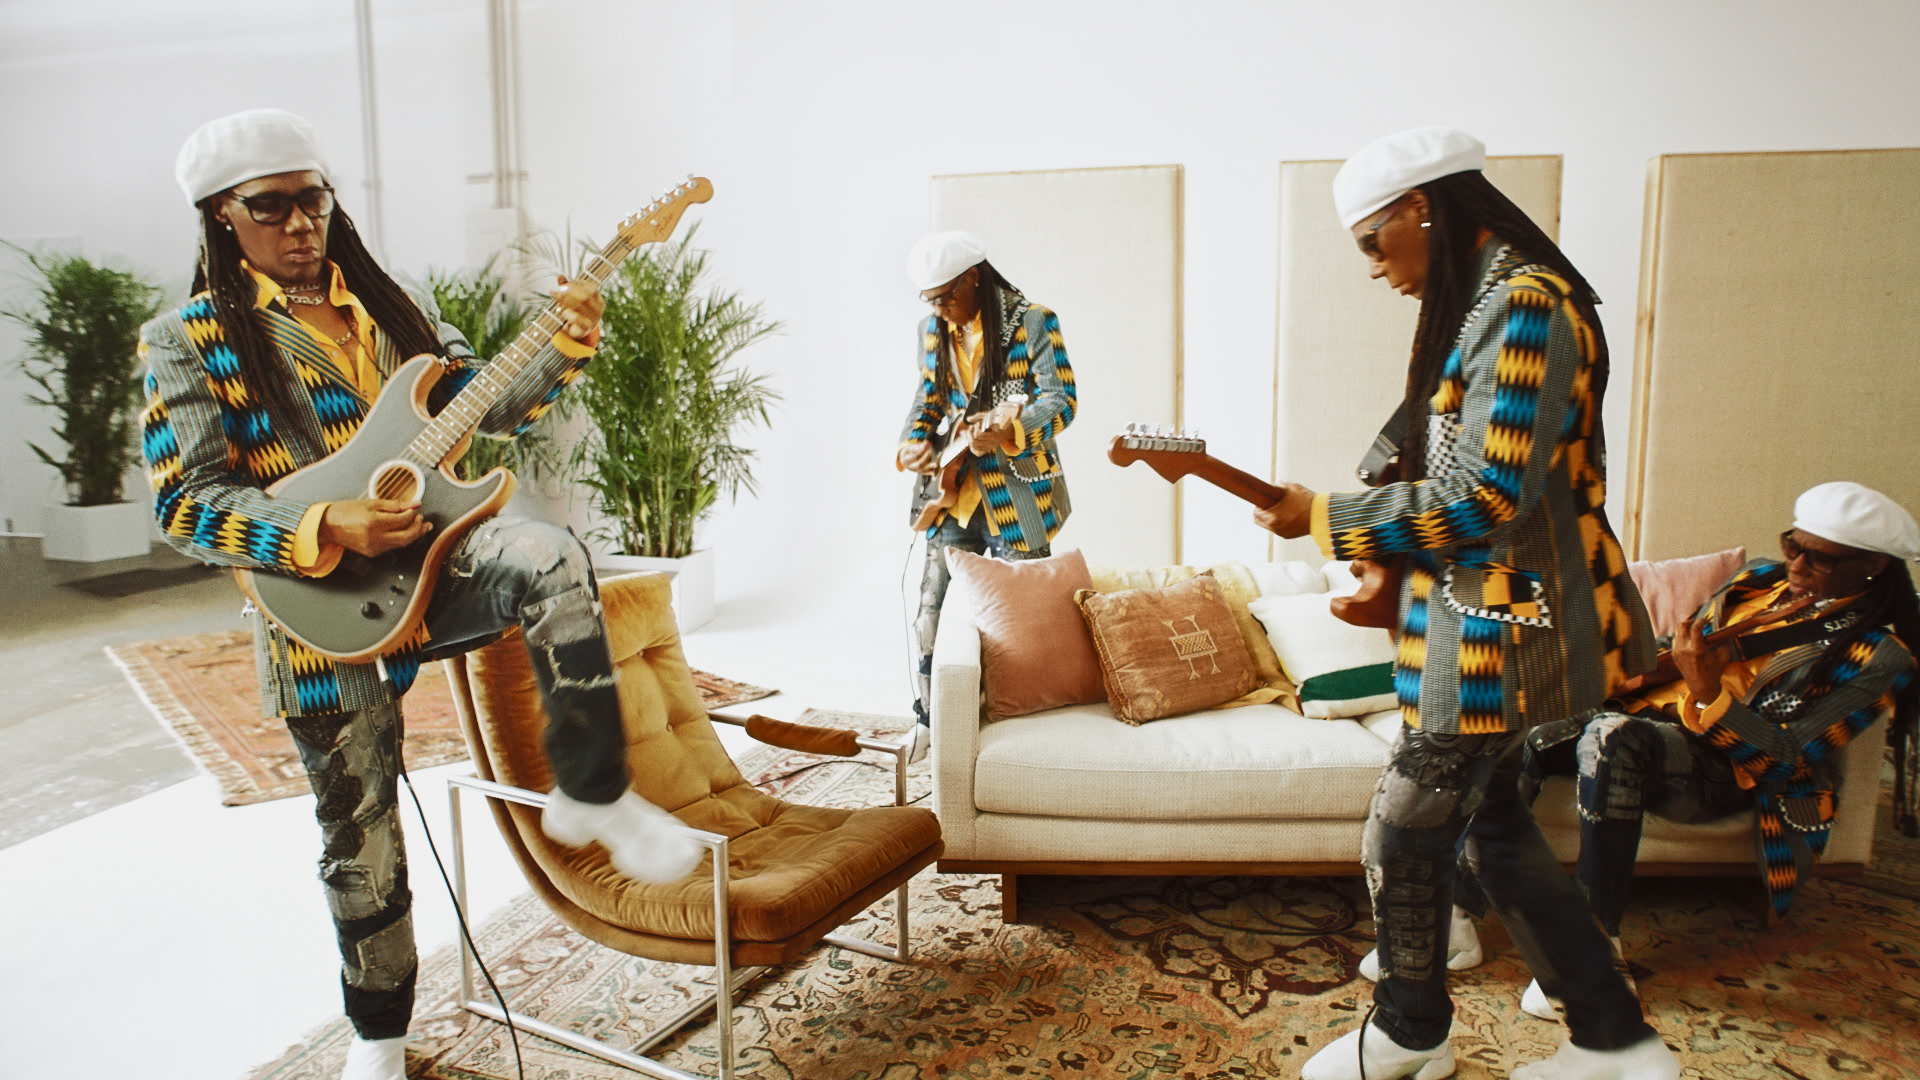 Nile Rodgers Dissects The Tonal Possibilities Of The Fender Acoustasonic Stratocaster In New Video